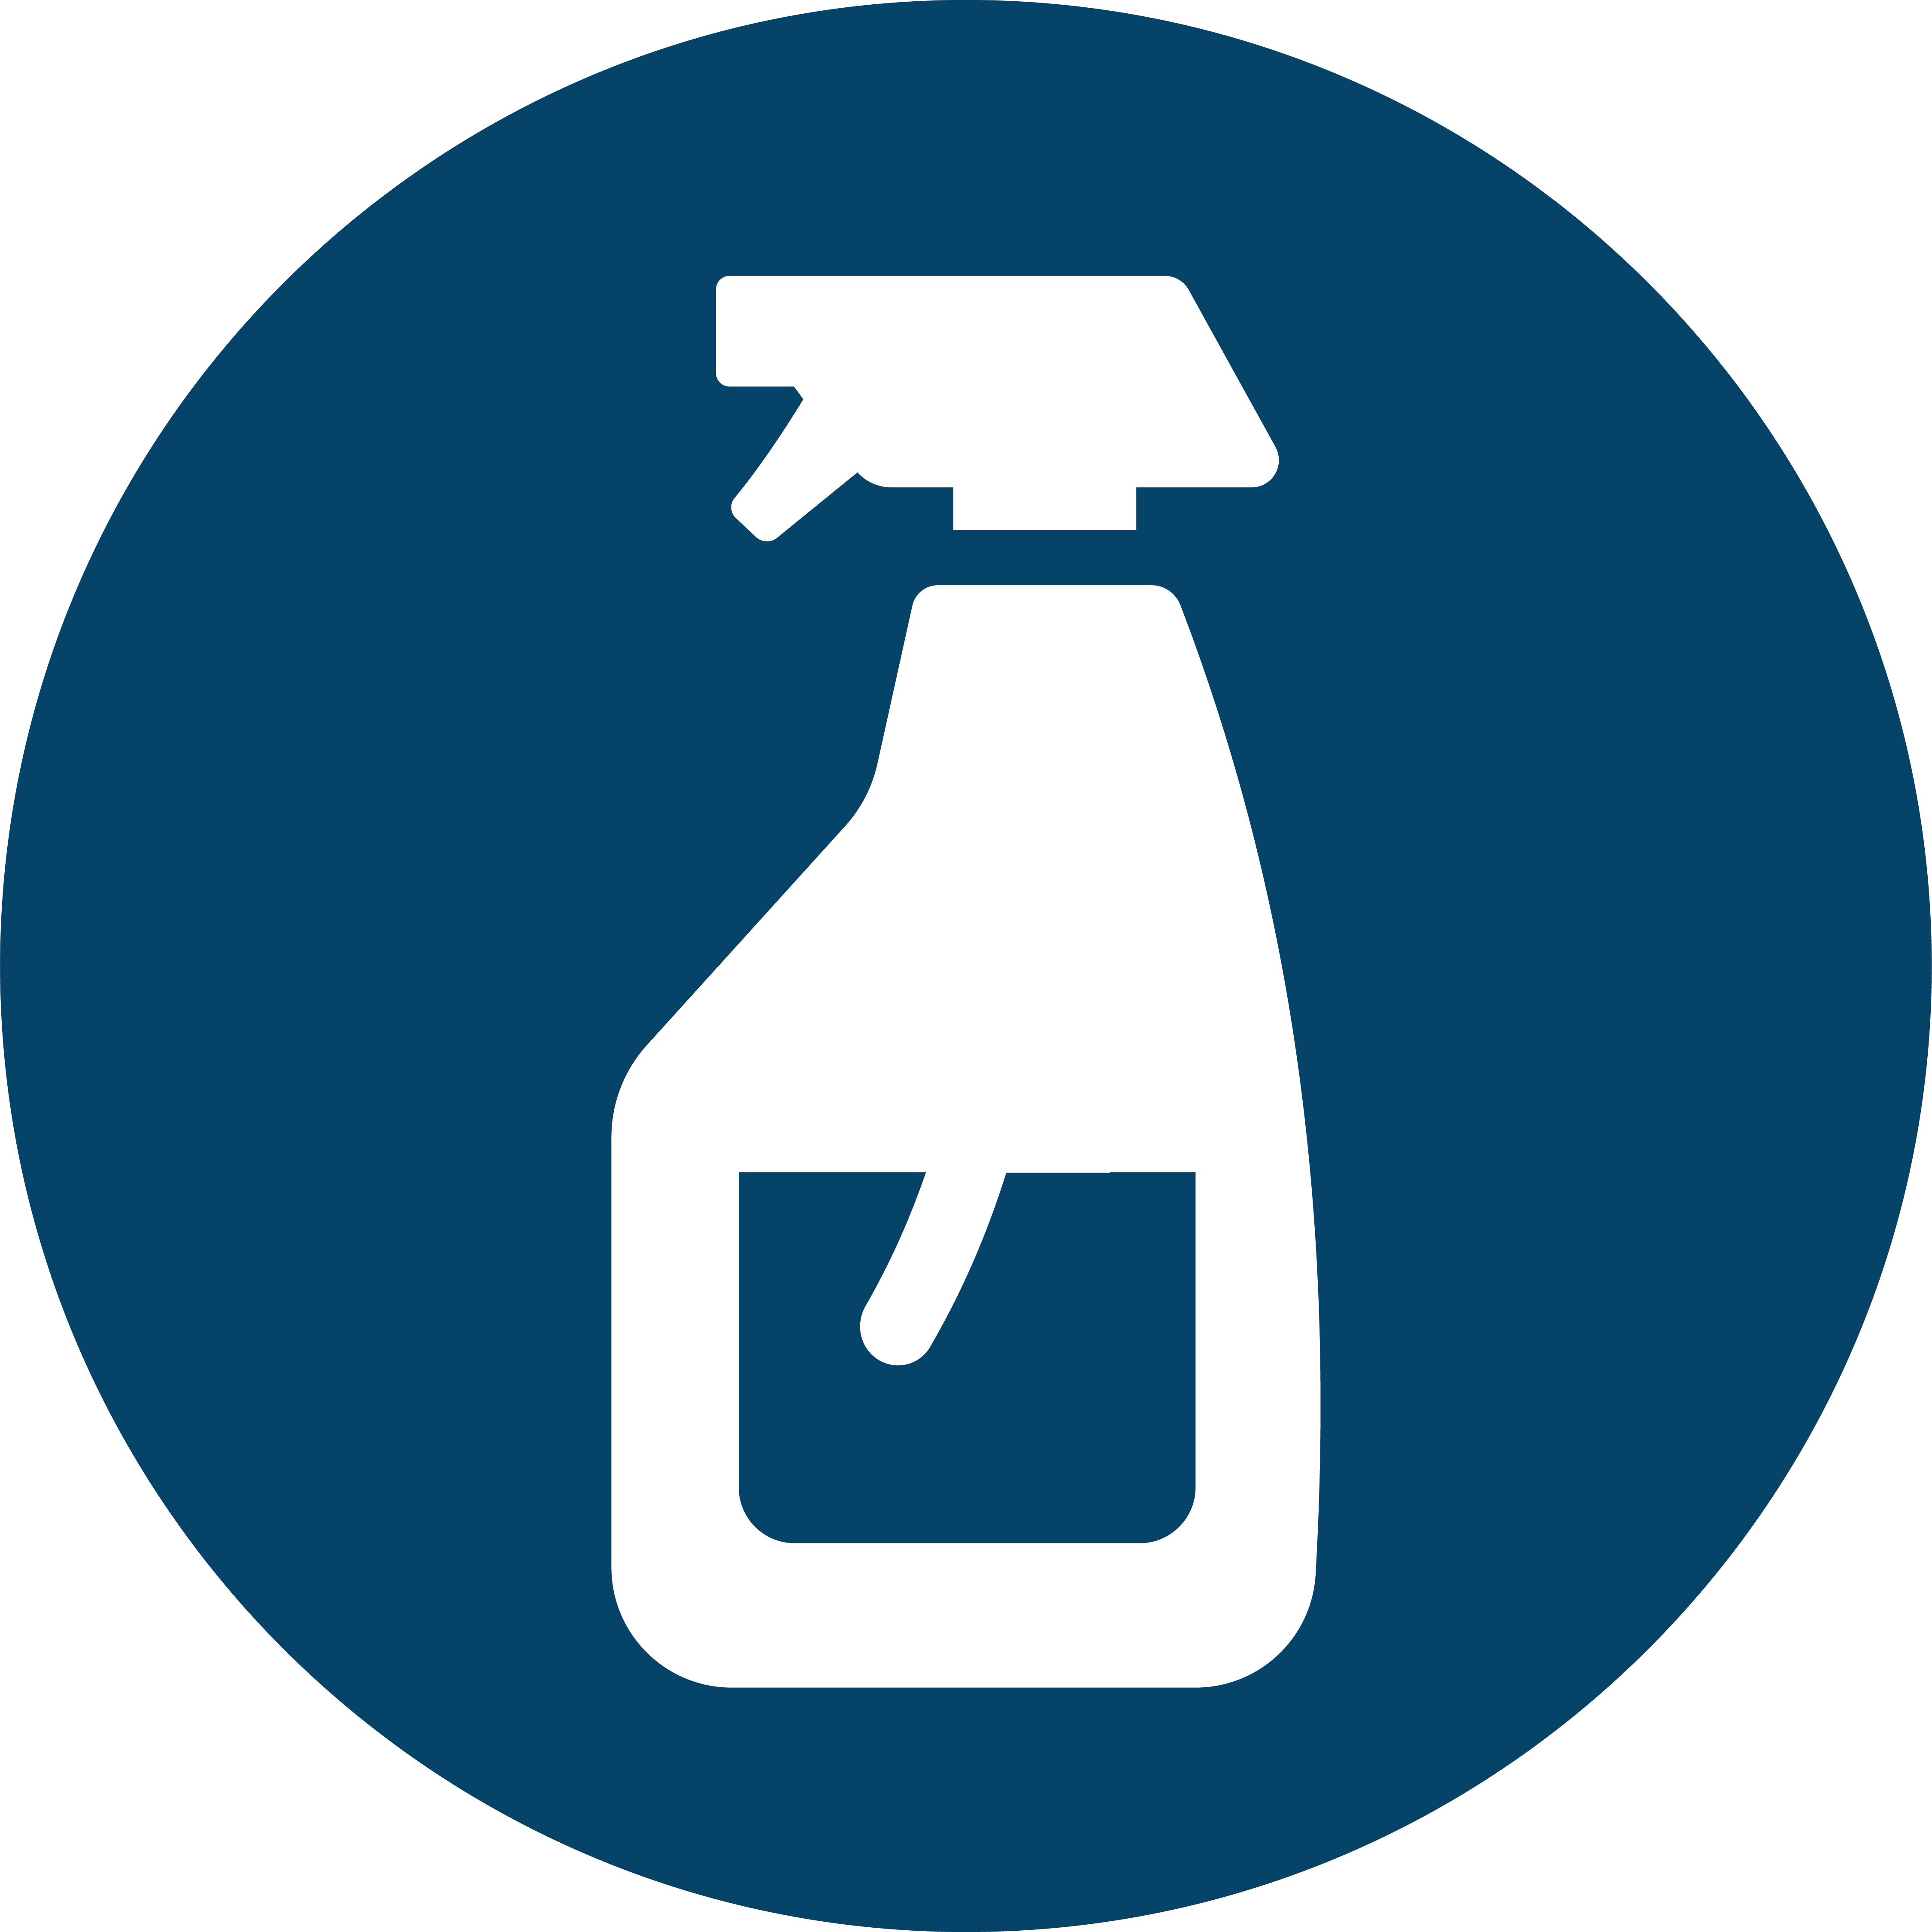 Graphic of a cleaning bottle in white against a blue background.